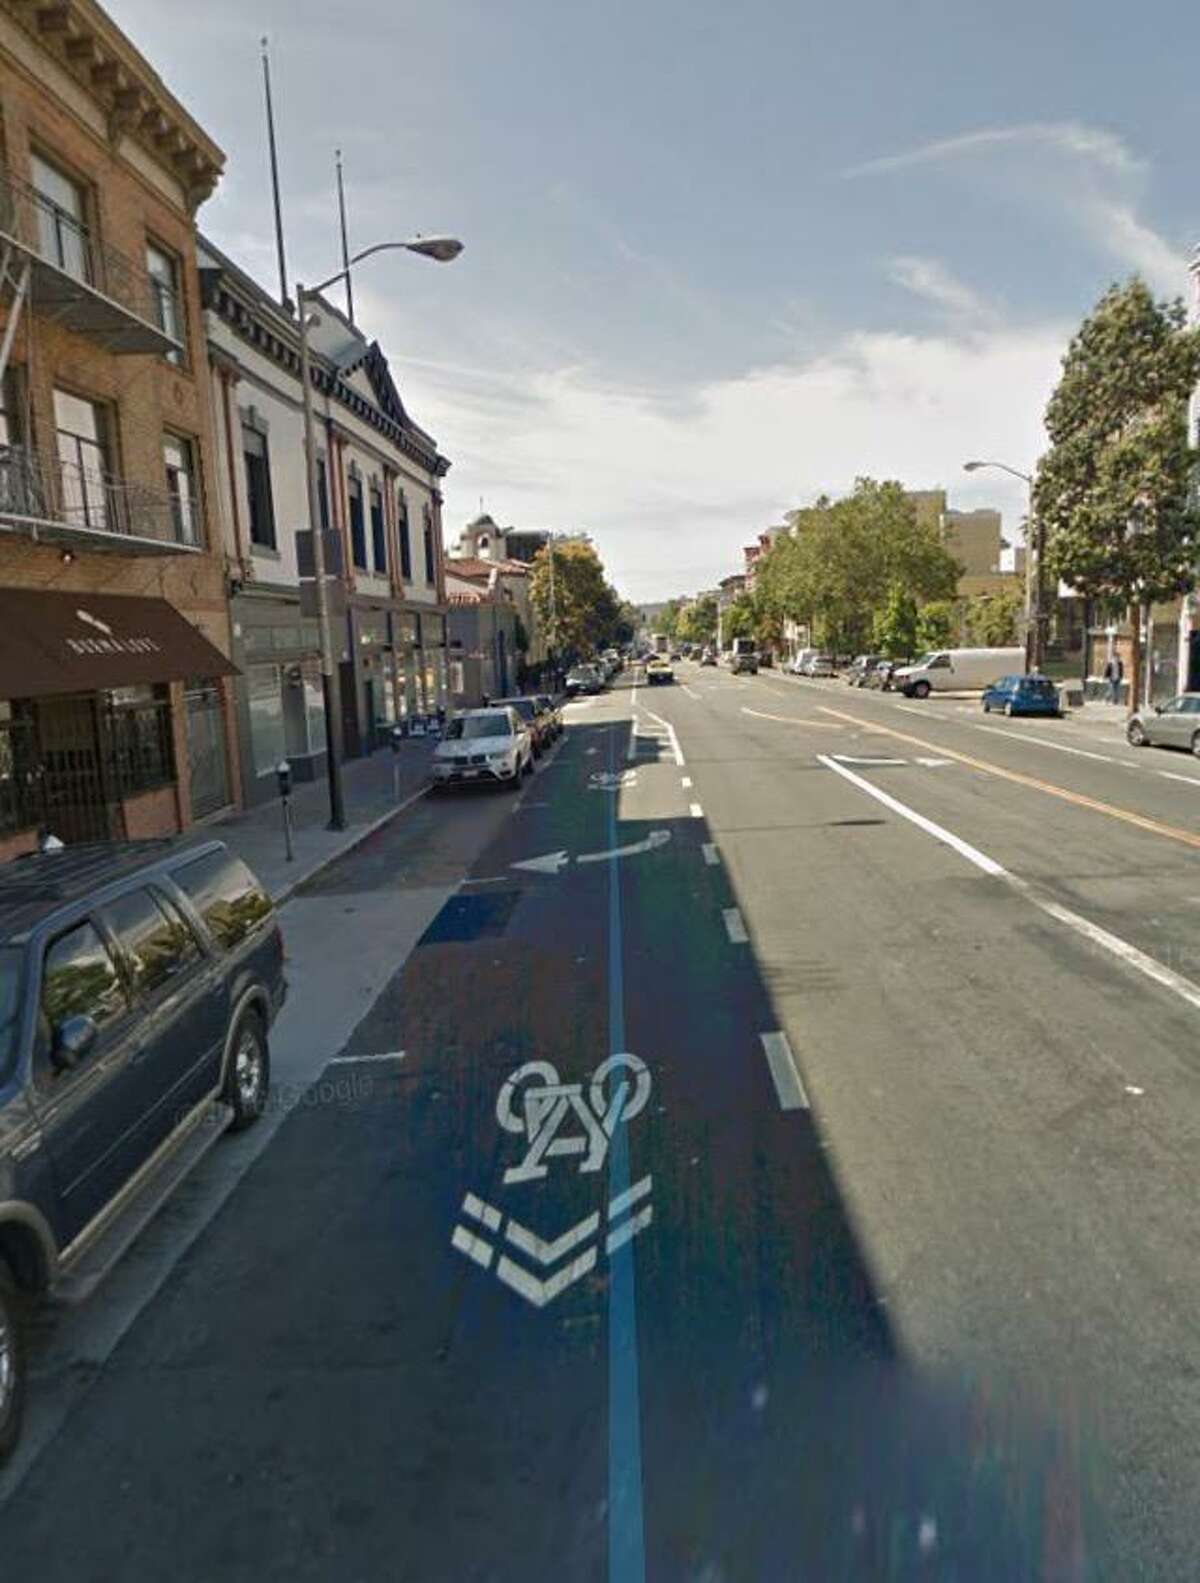 A man was shot and killed Thursday night in San Francisco’s Mission District outside the restaurant, Burma Love, police said.